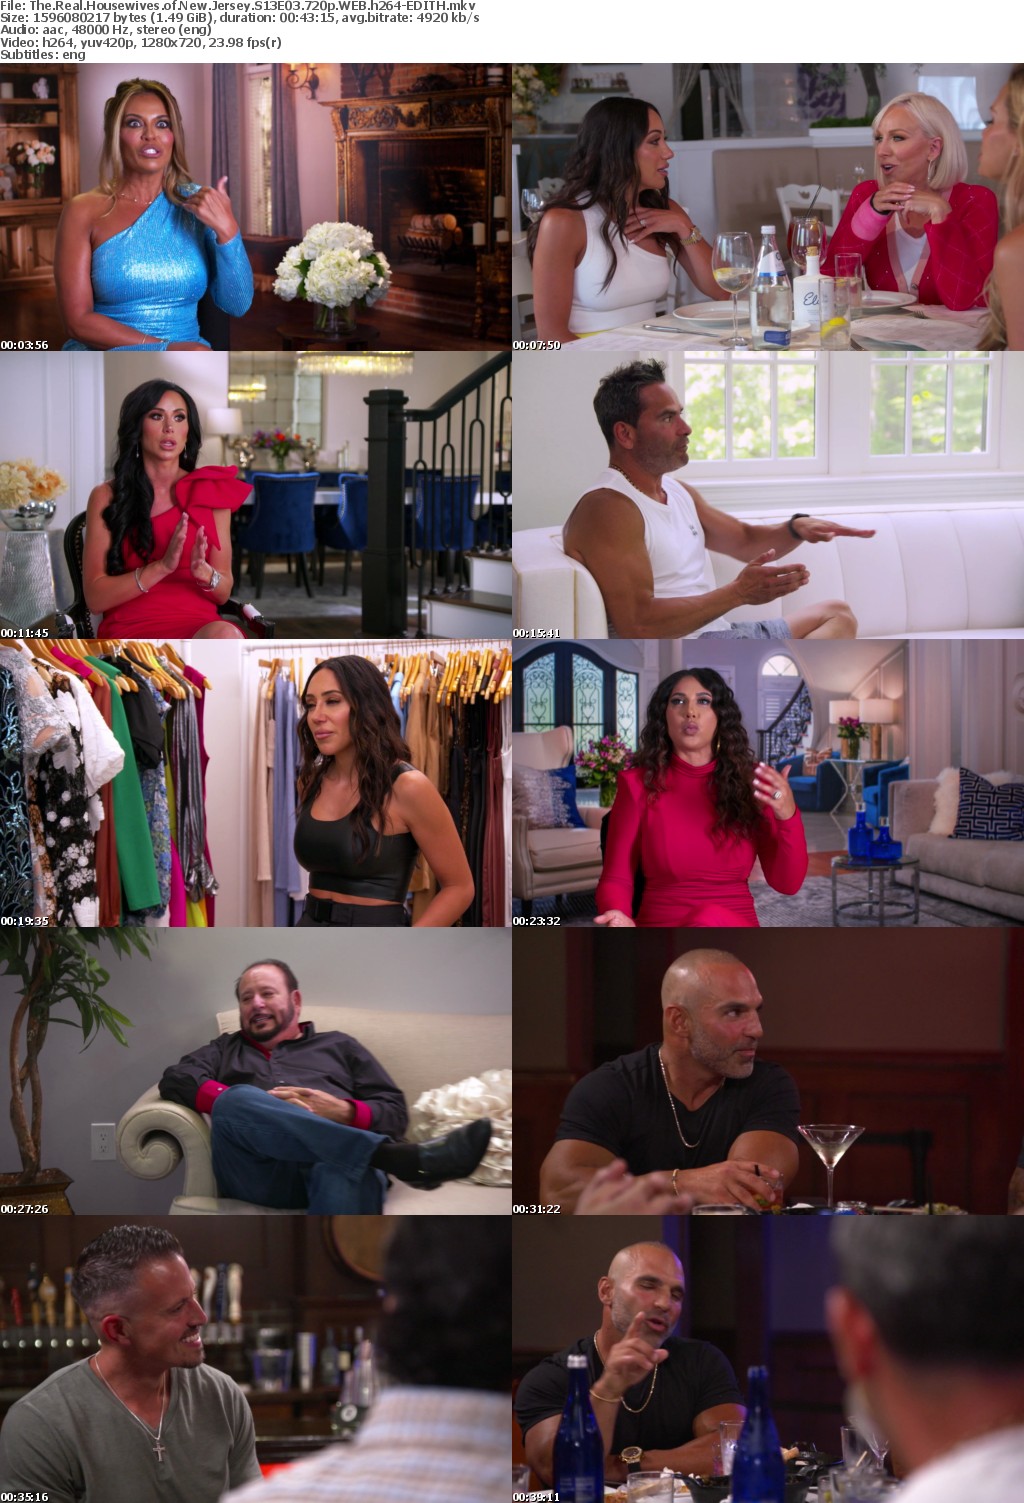 The Real Housewives of New Jersey S13E03 720p WEB h264-EDITH